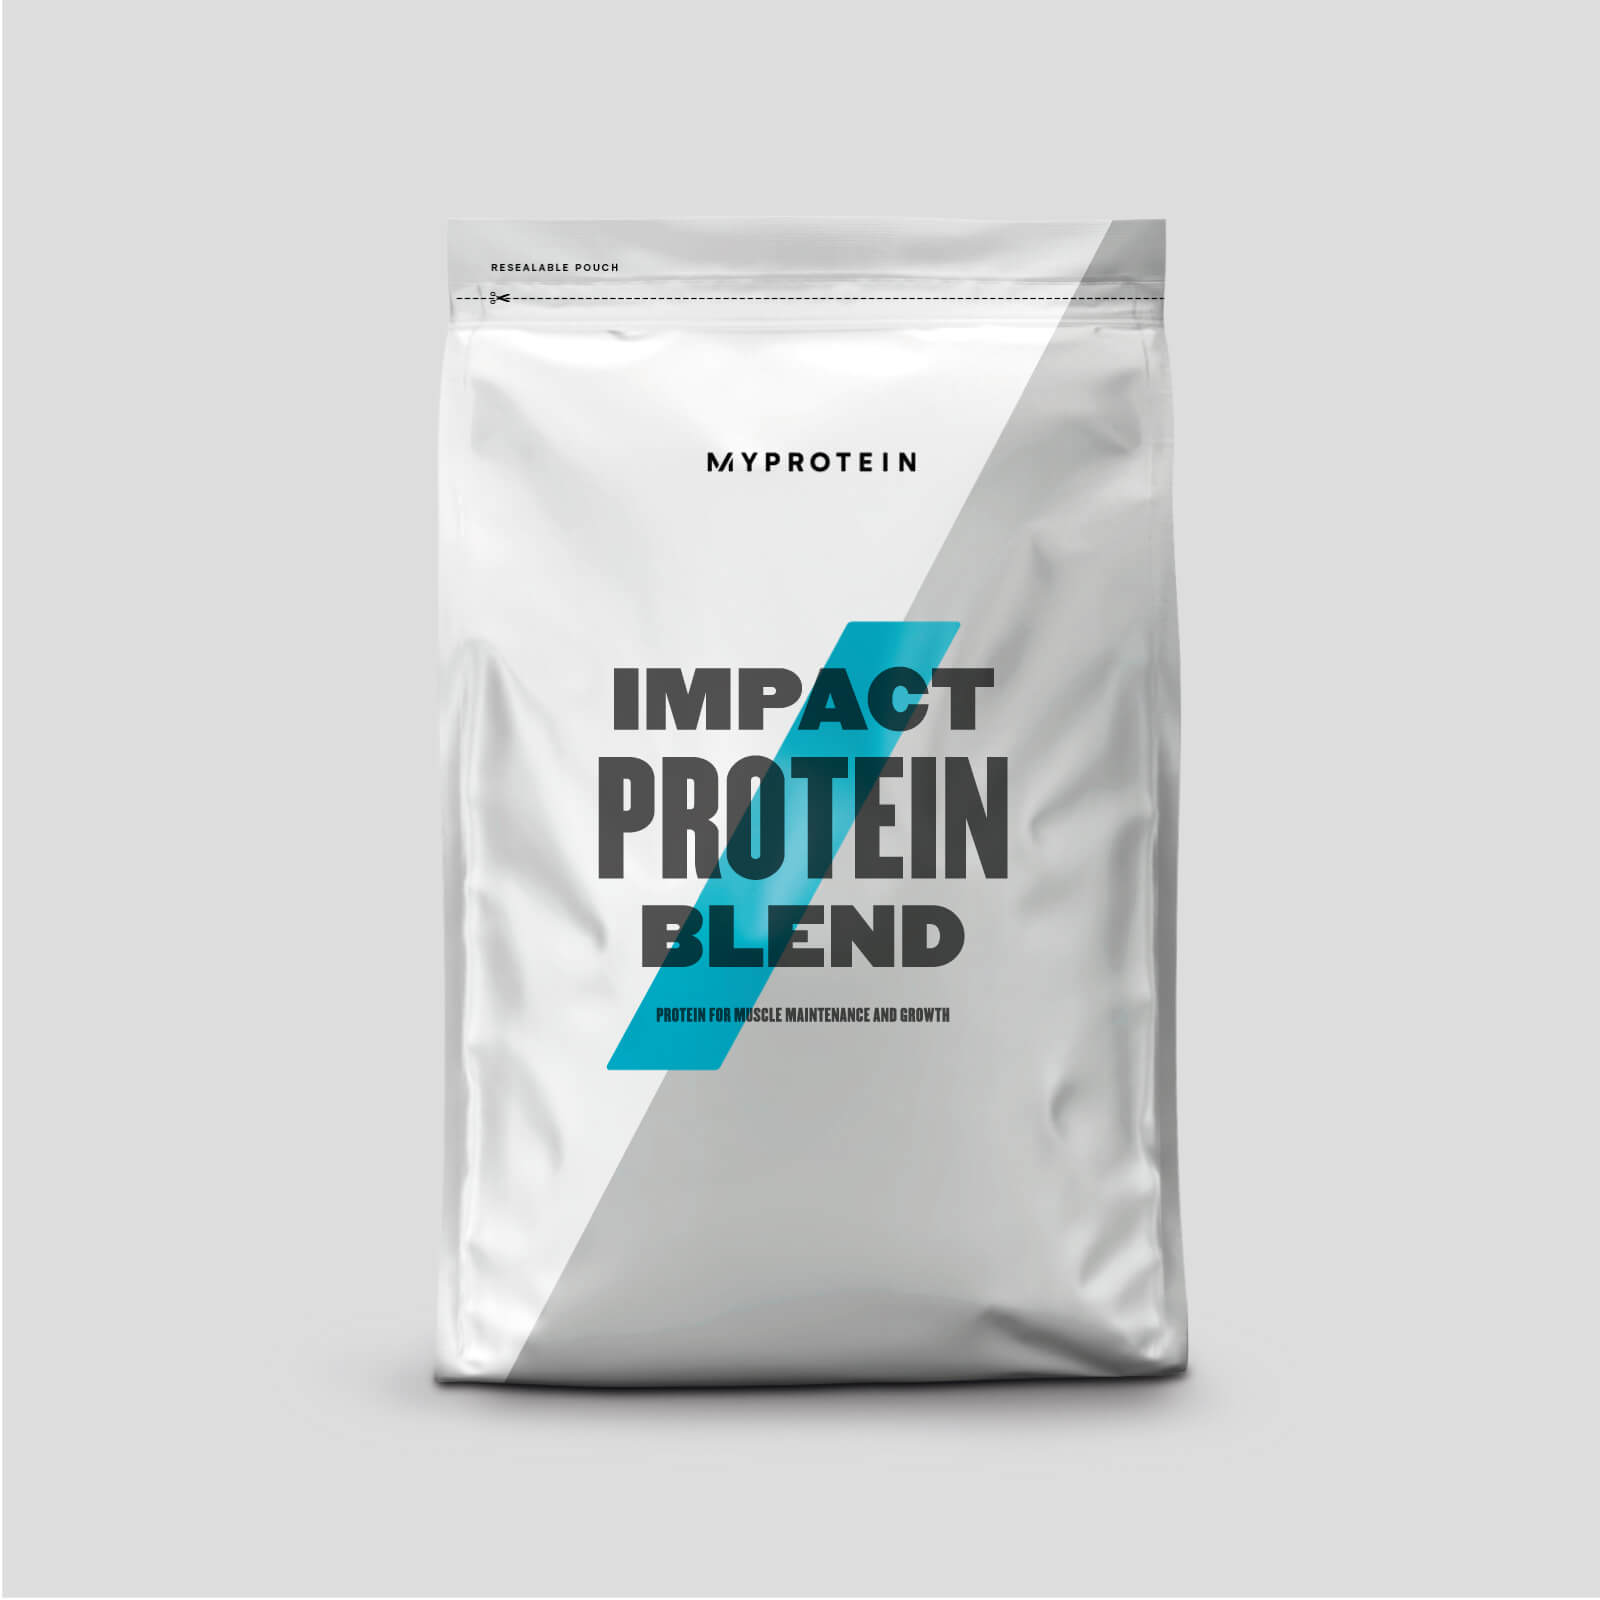 Myprotein Impact Protein Blend - 40servings - Chocolate